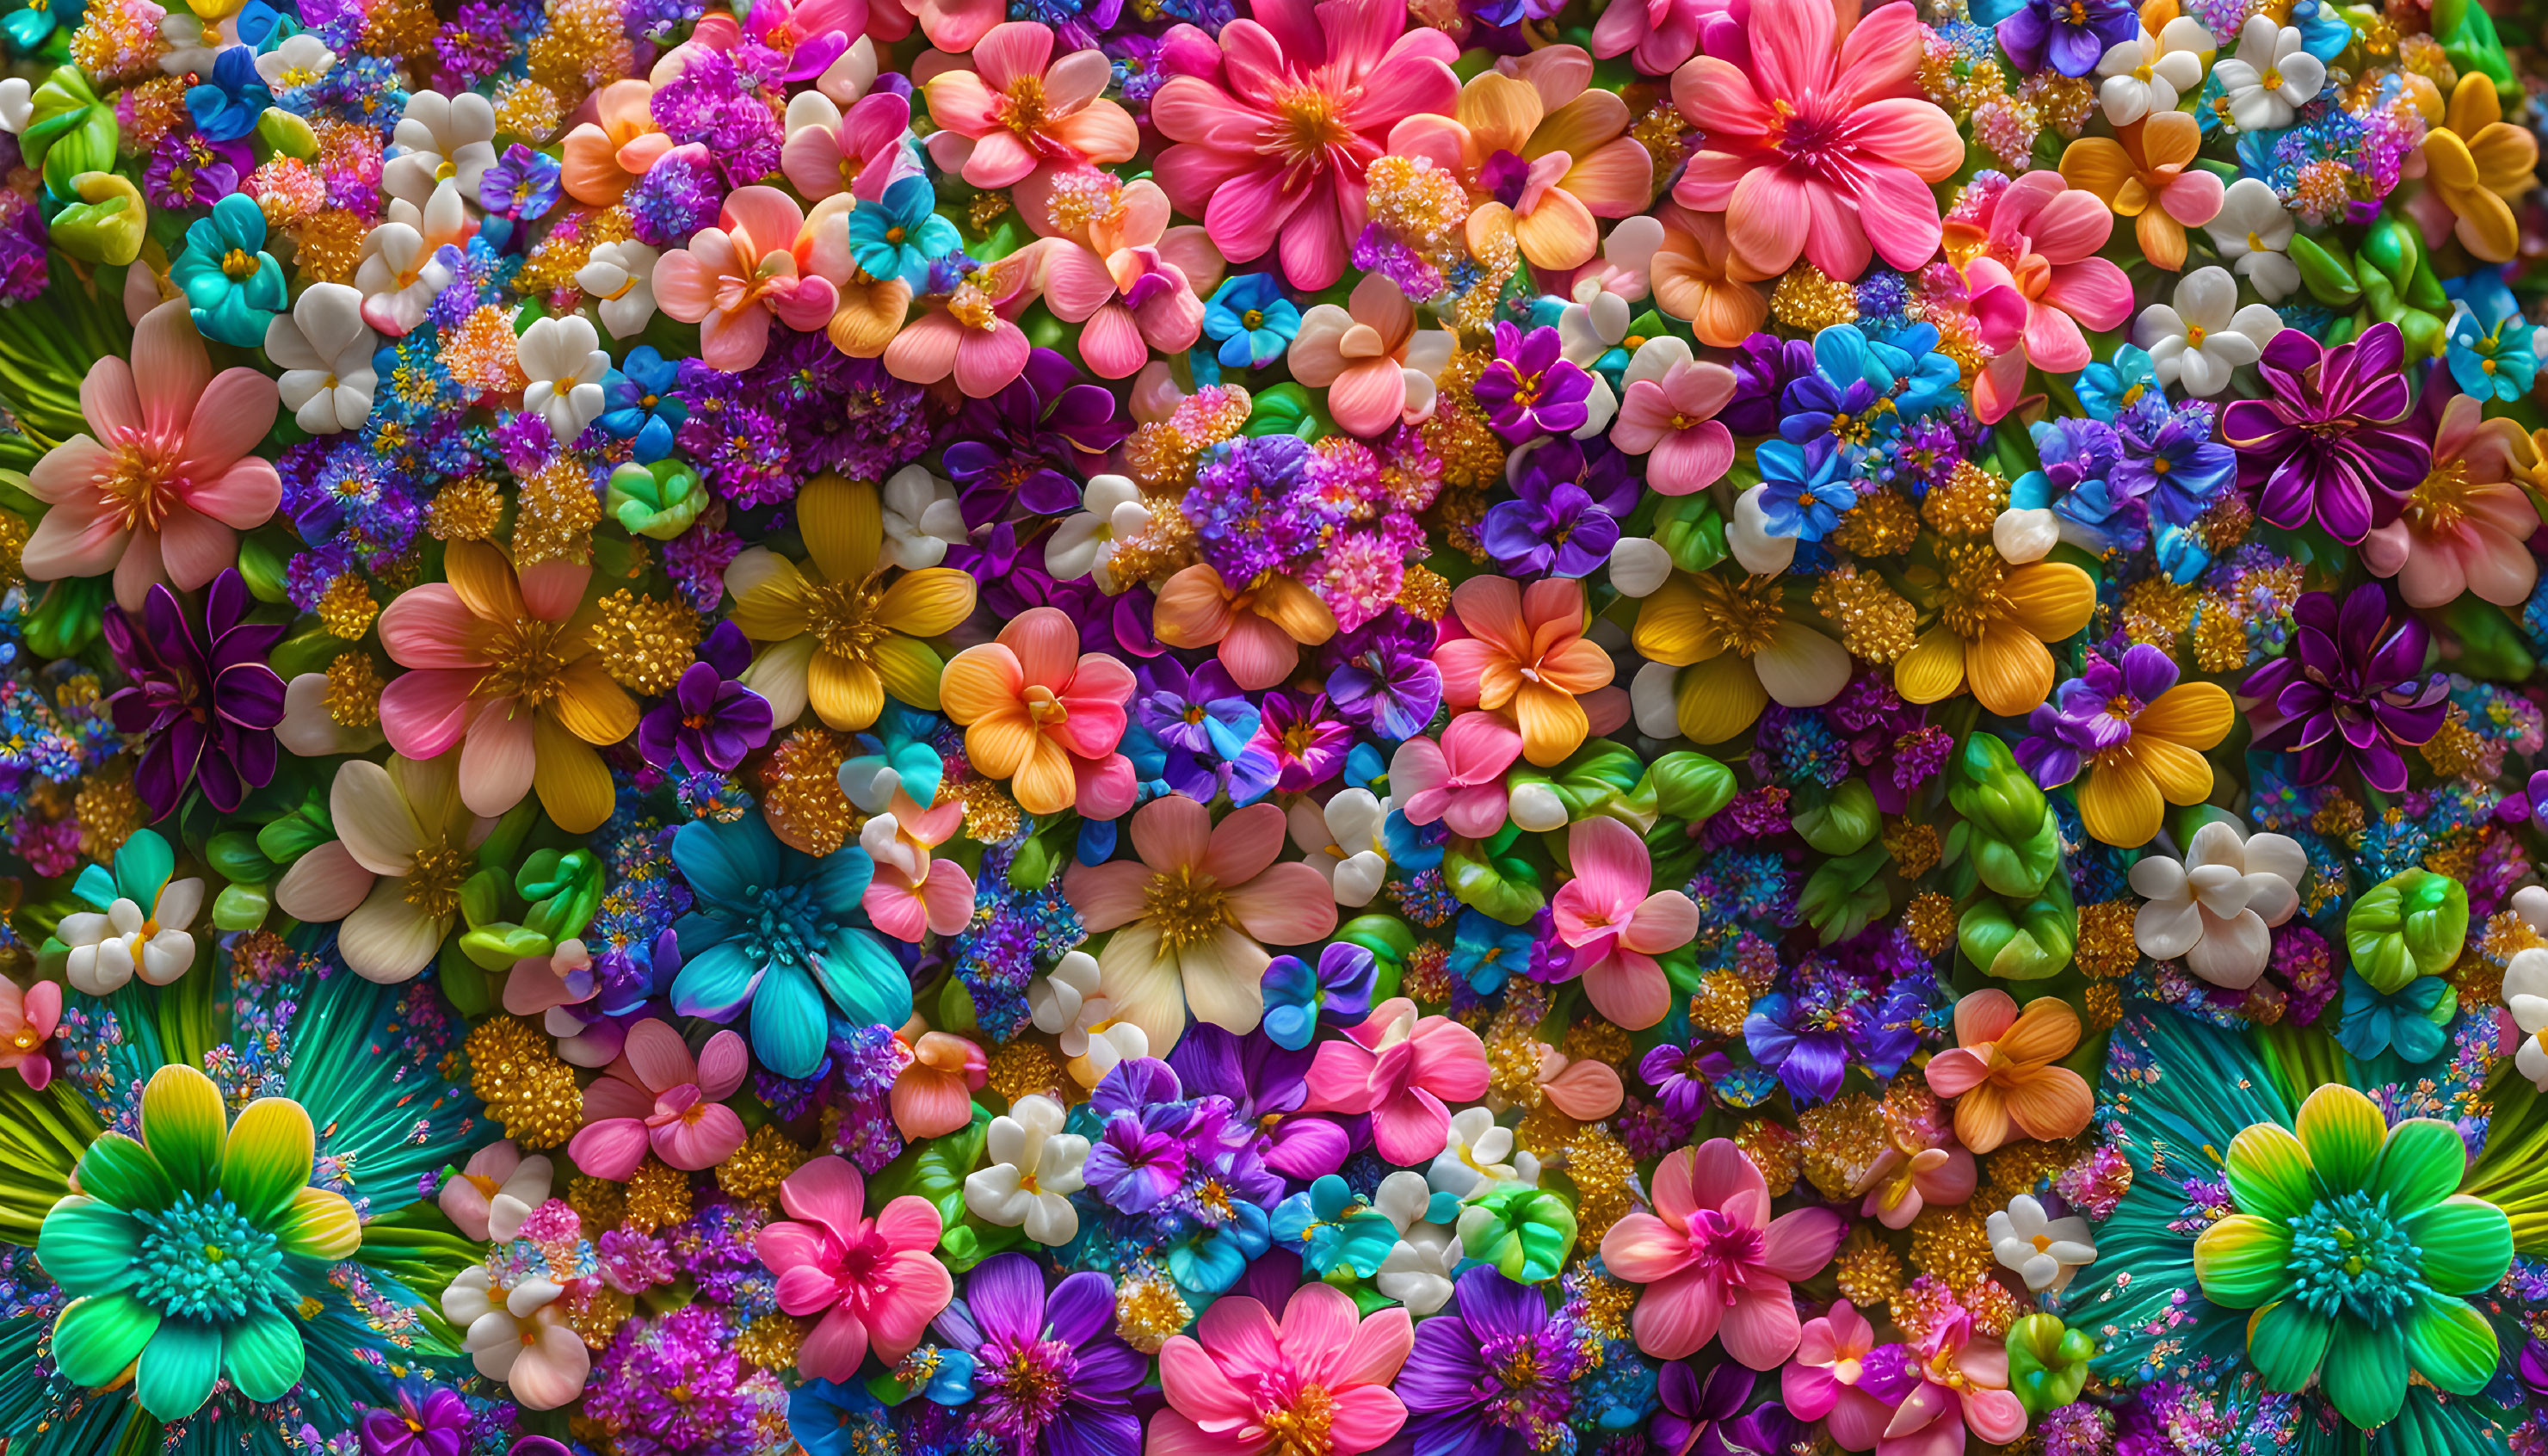 Colorful Close-Up of Various Flowers in Pinks, Blues, Yellows, and Purp